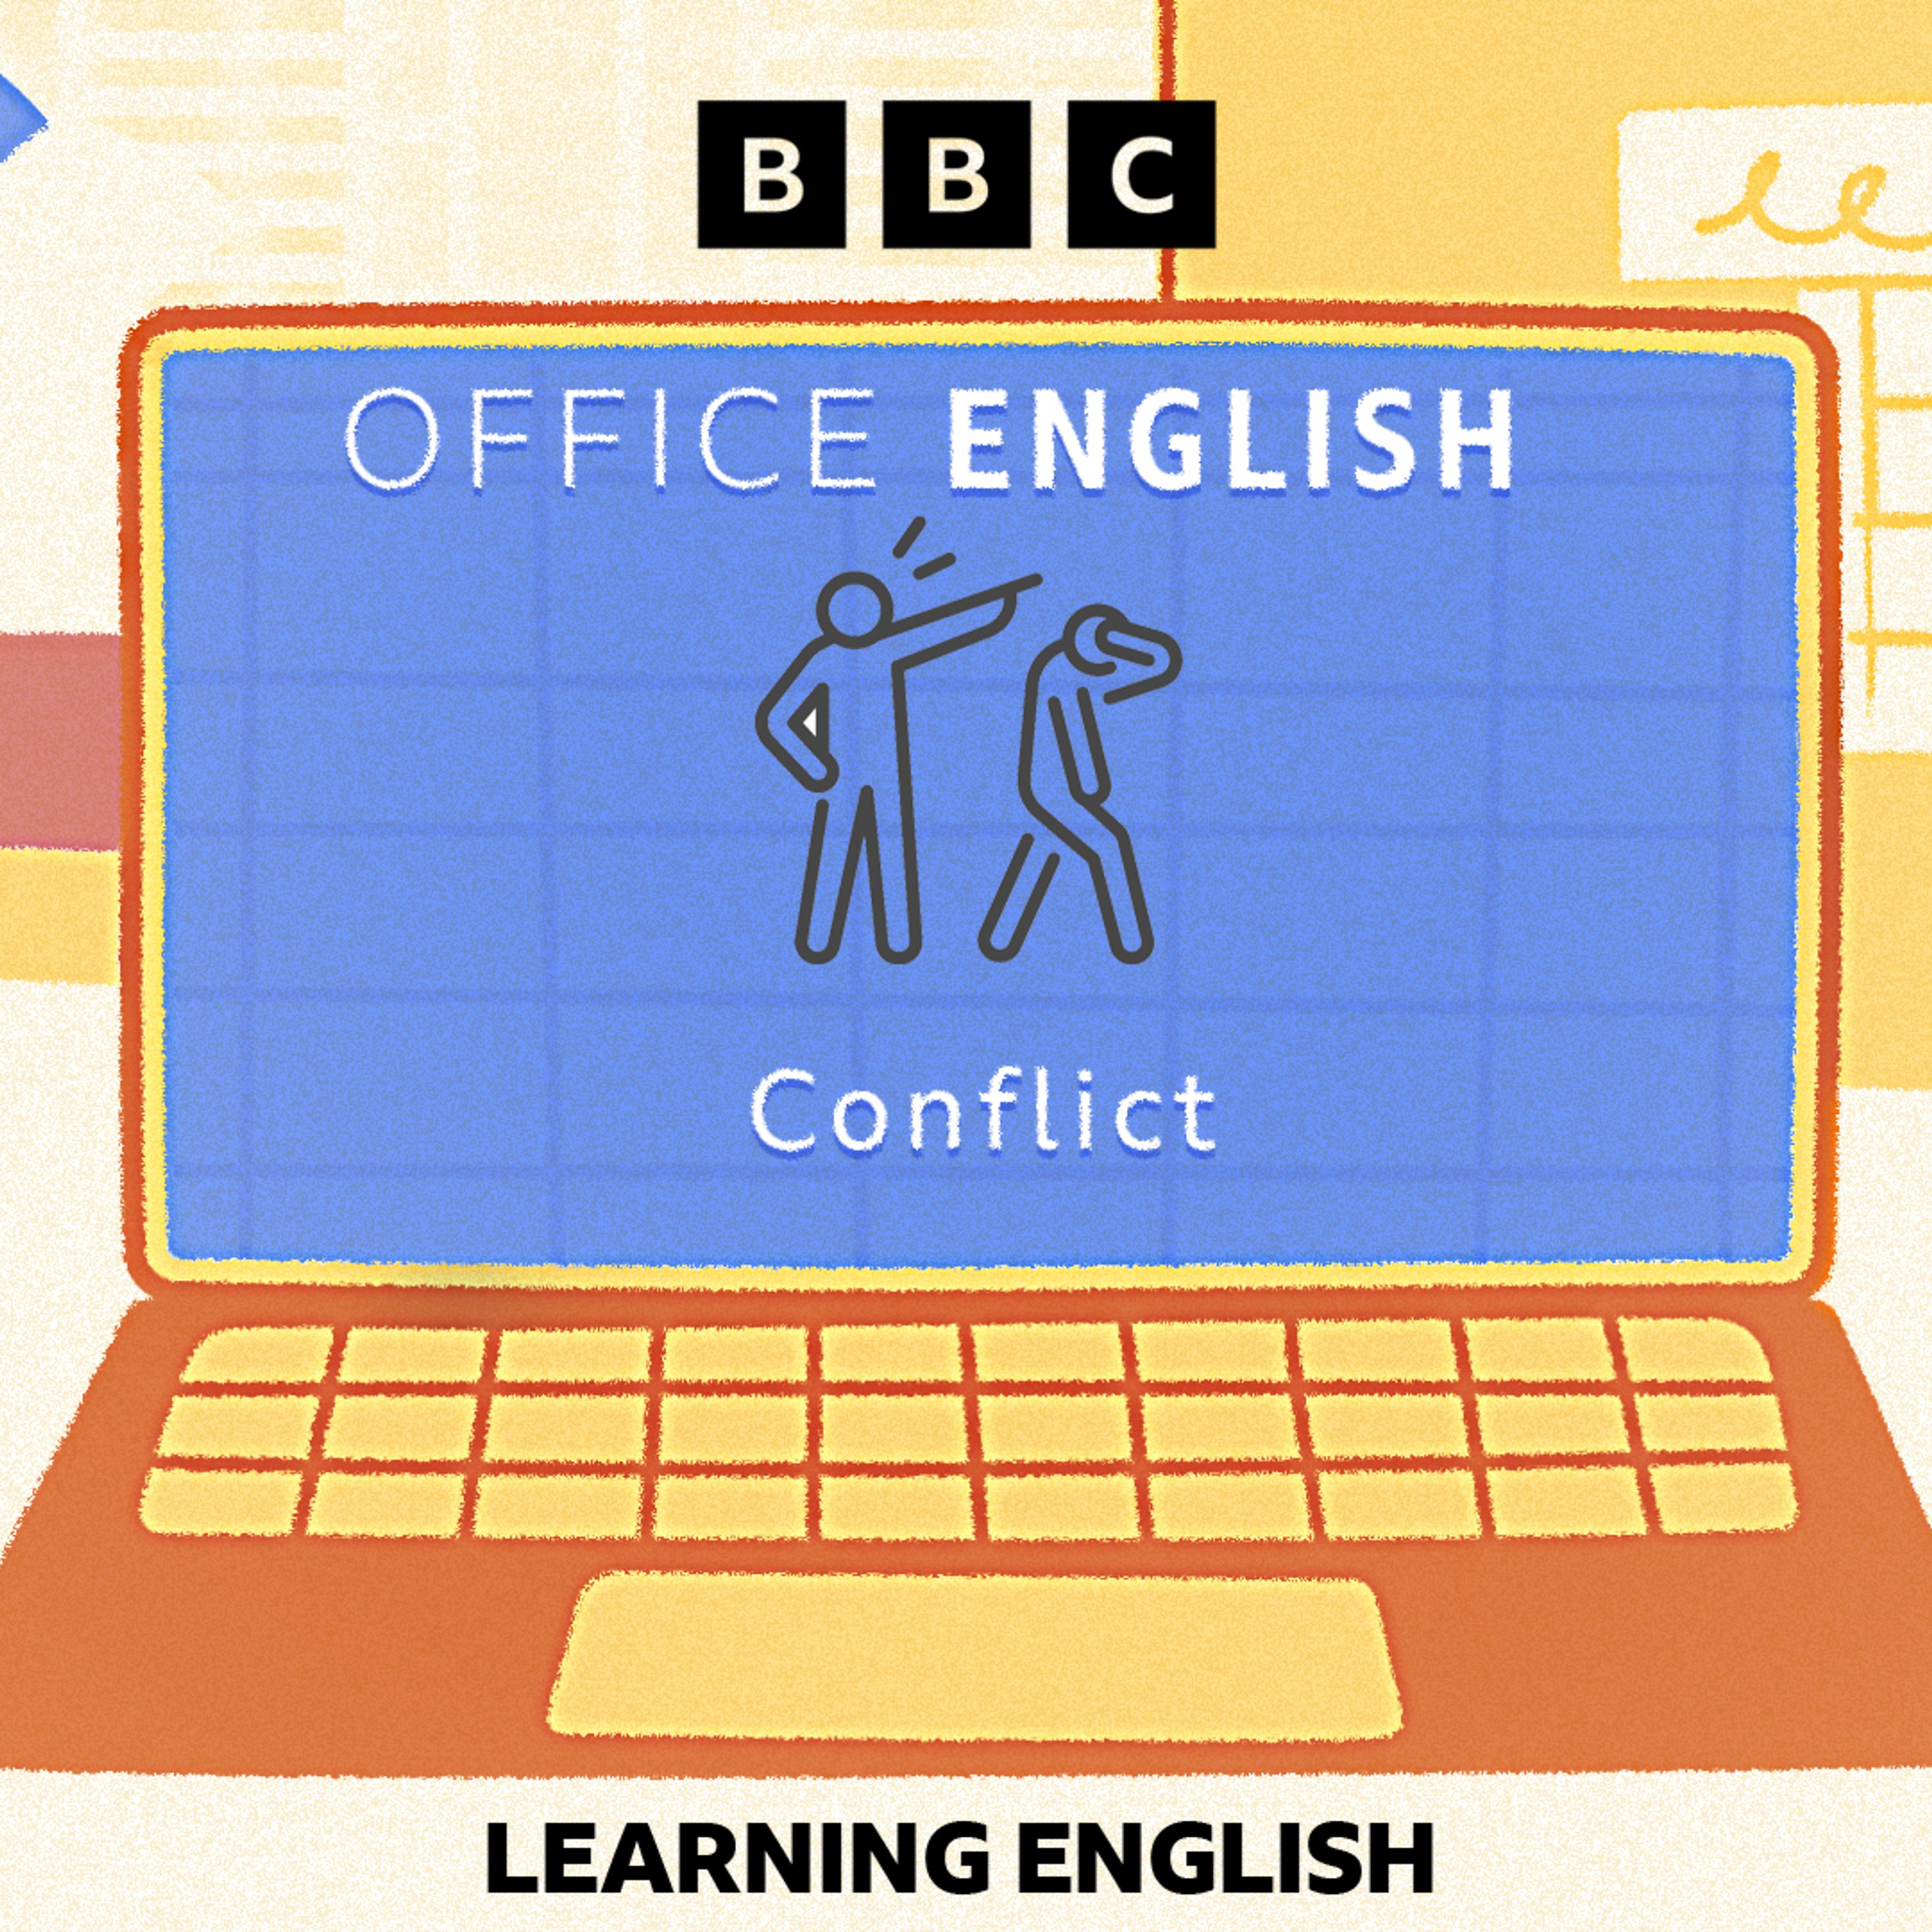 Office English: Conflict